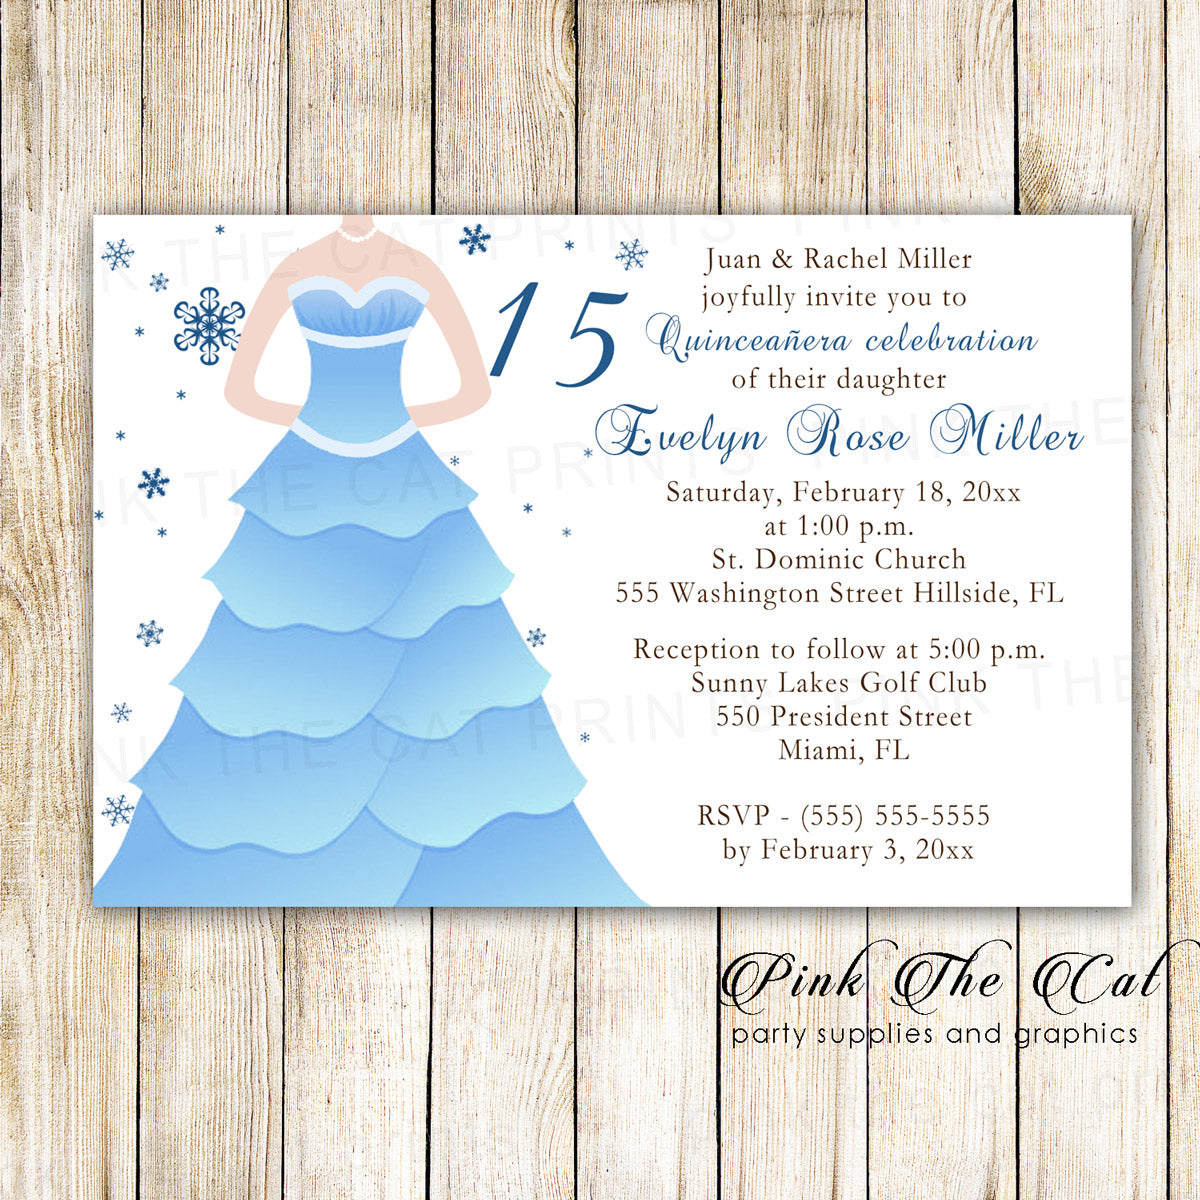 30 Cards Winter Invitations Sweet 16 Quinceanera Blue Dress